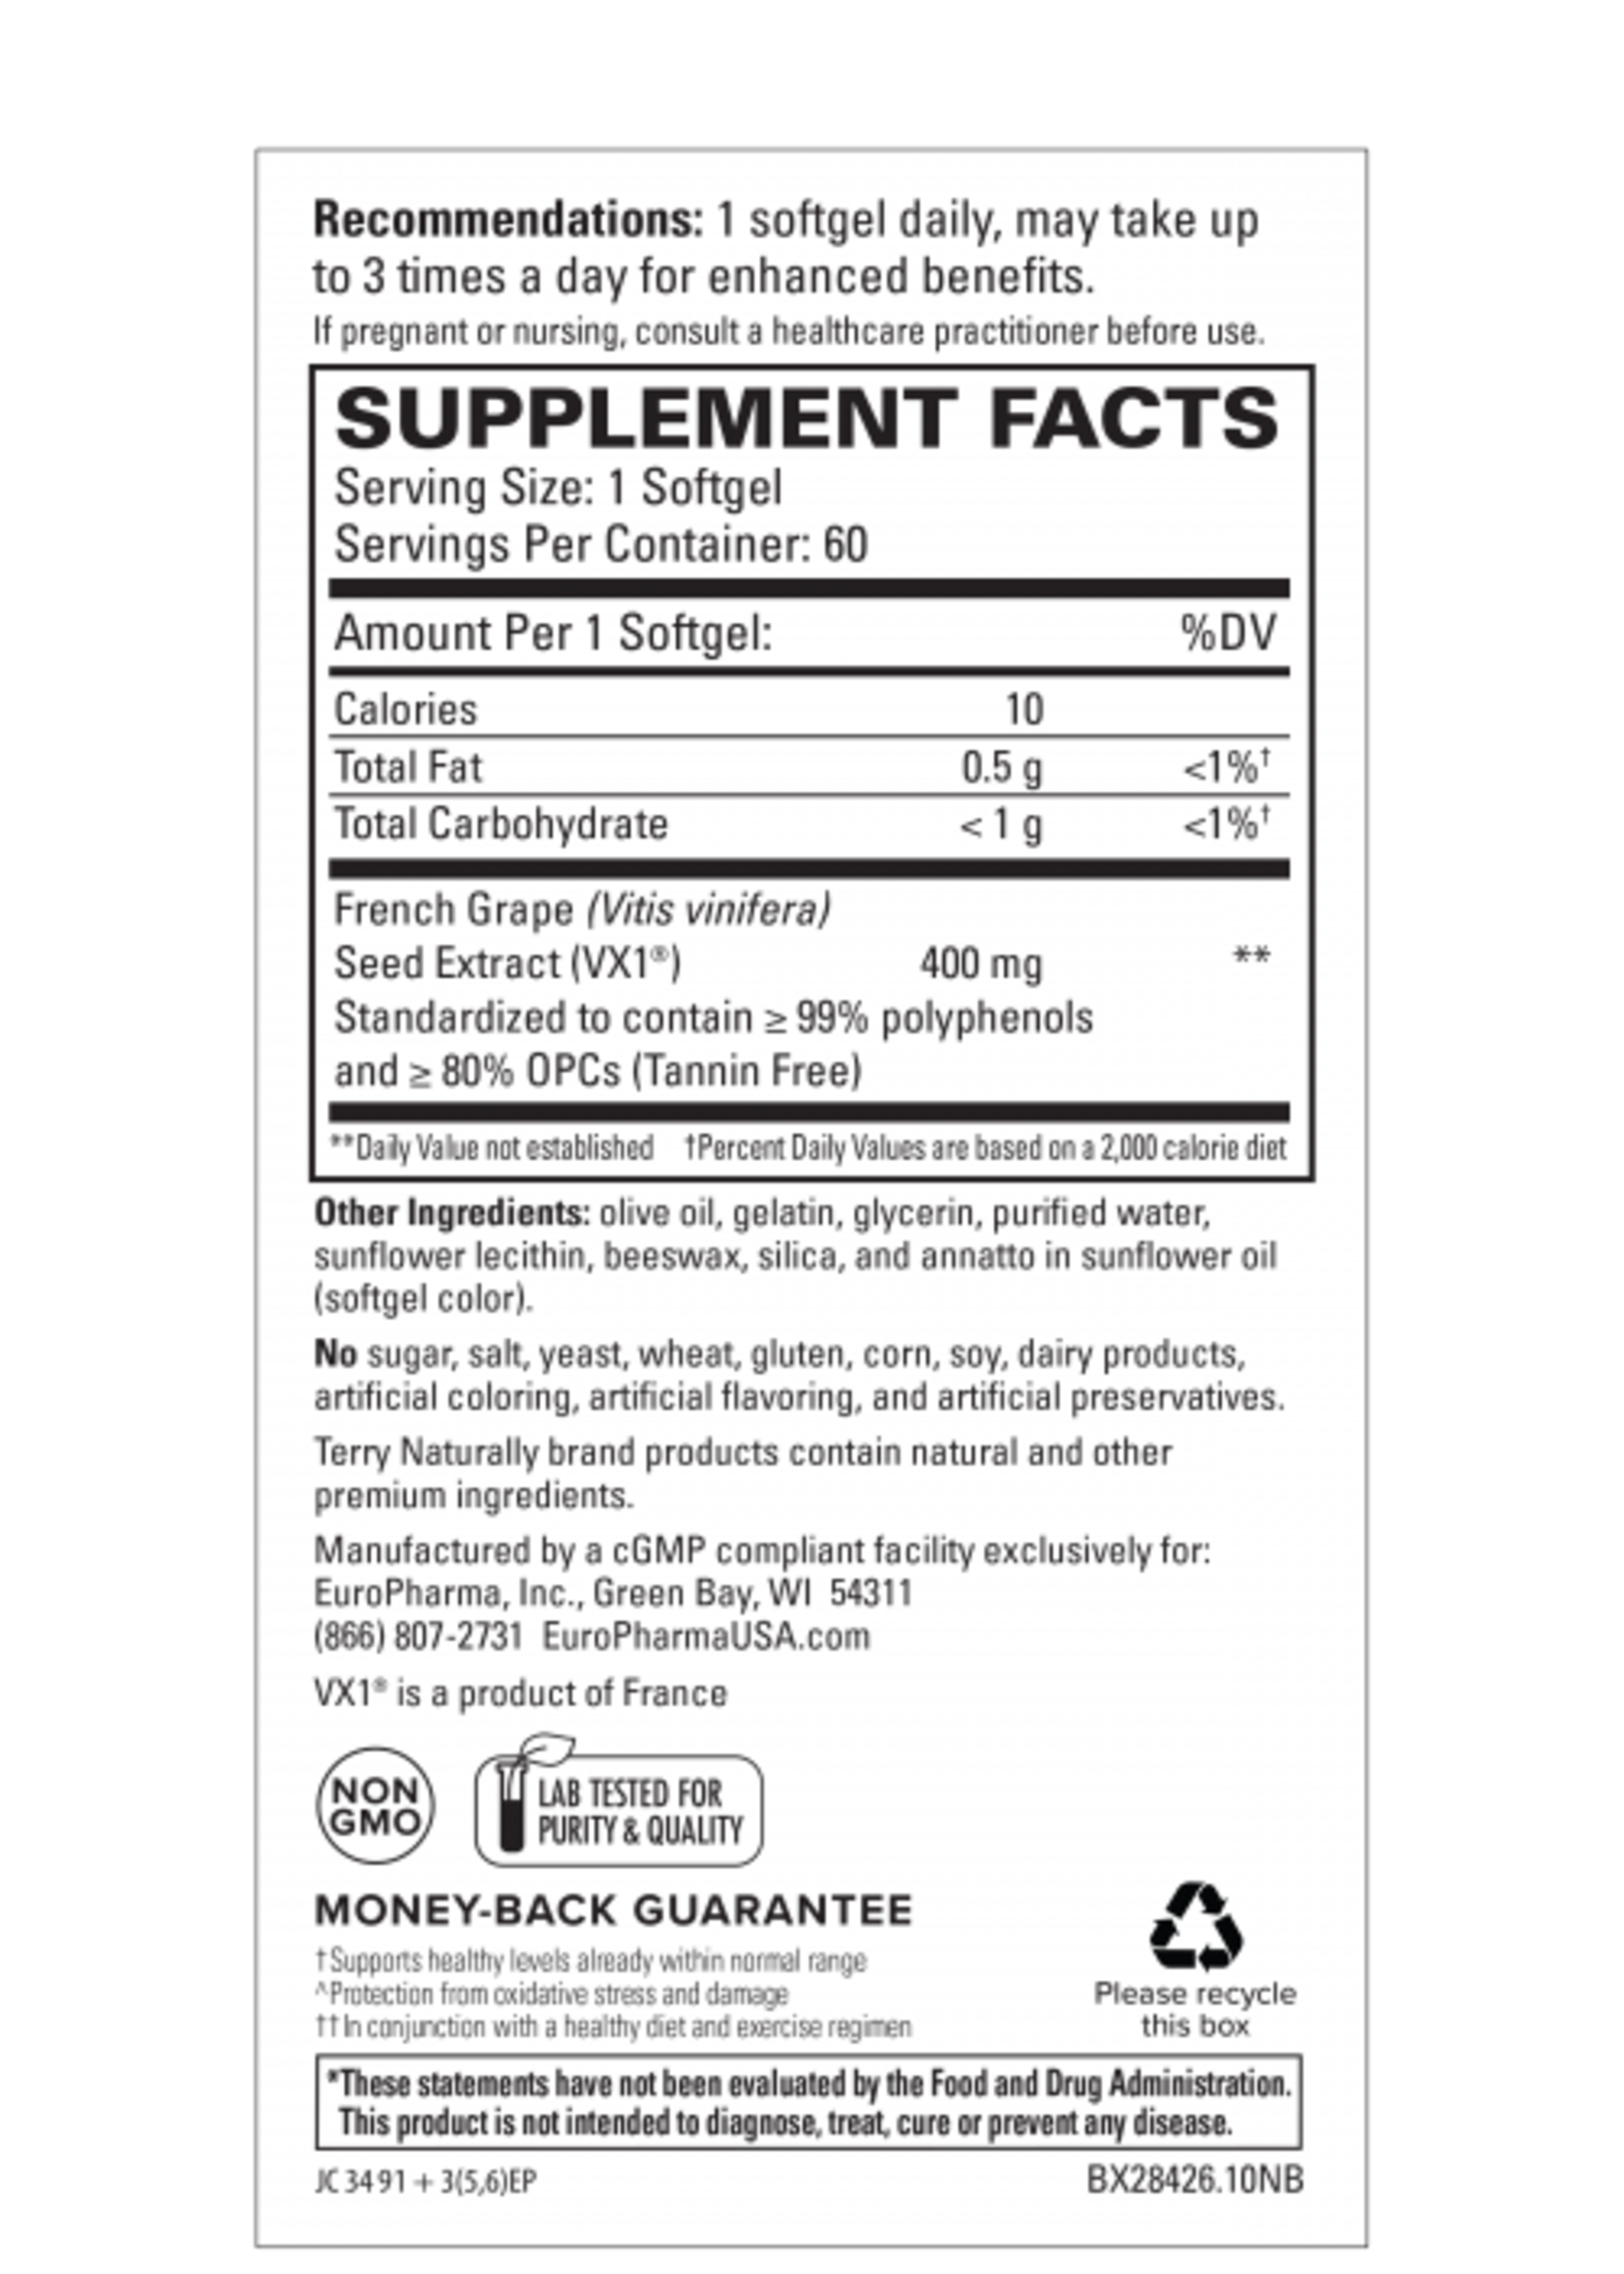 Clinical OPC® Extra Strength French Grape Seed Extract VX1® 400 mg   60 Softgels